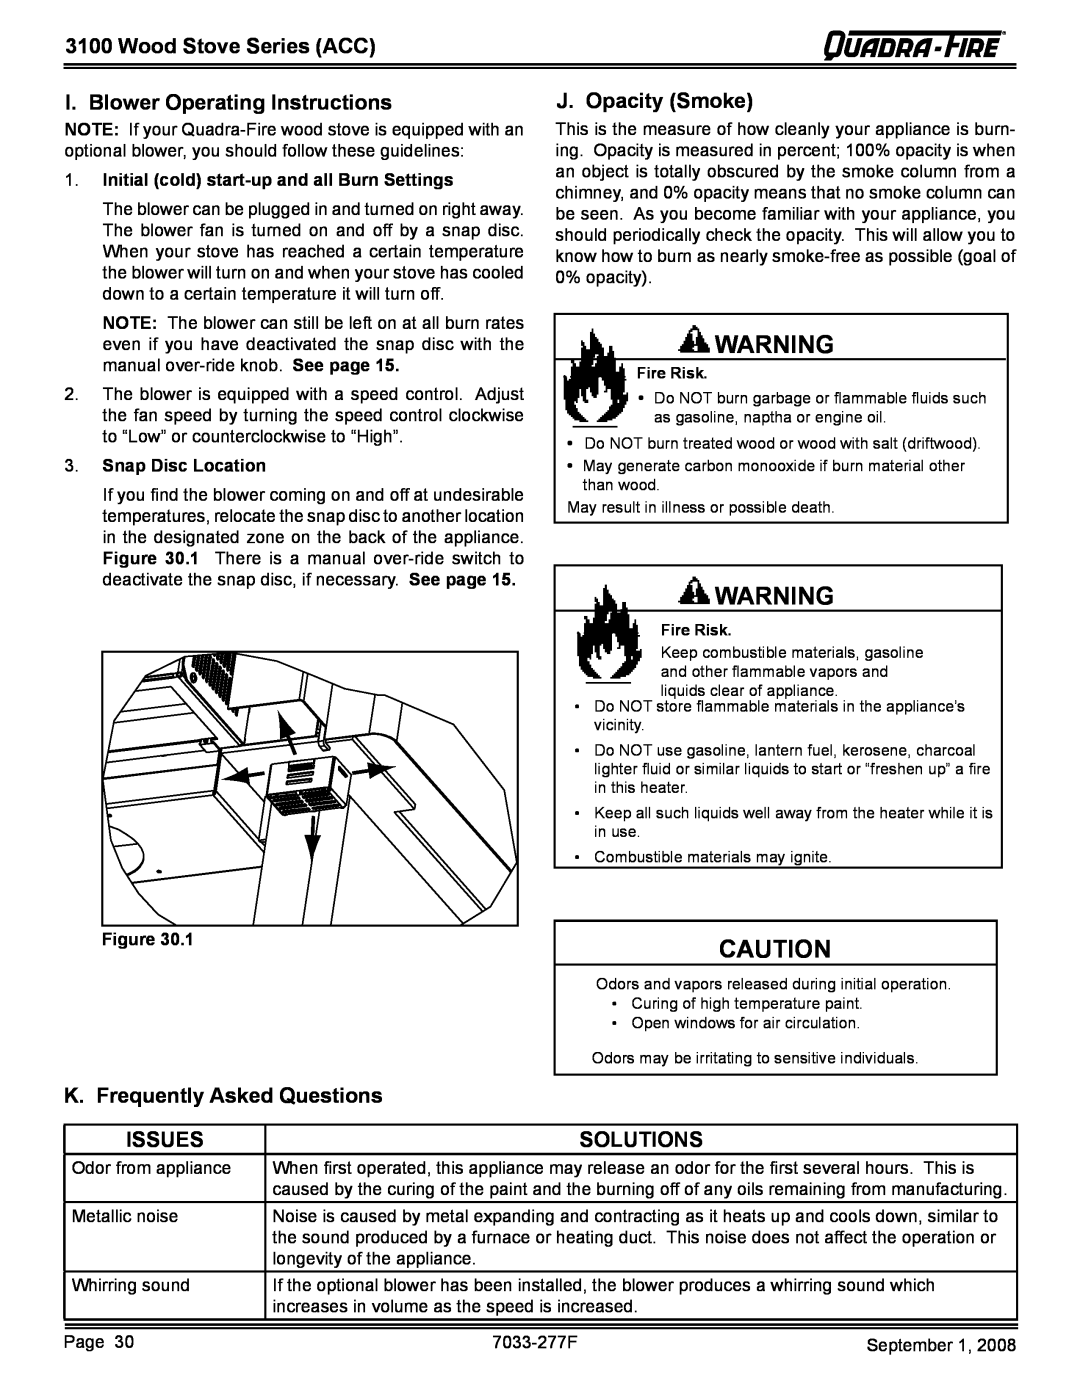 Hearth and Home Technologies 31ST-ACC I. Blower Operating Instructions, K. Frequently Asked Questions, J. Opacity Smoke 